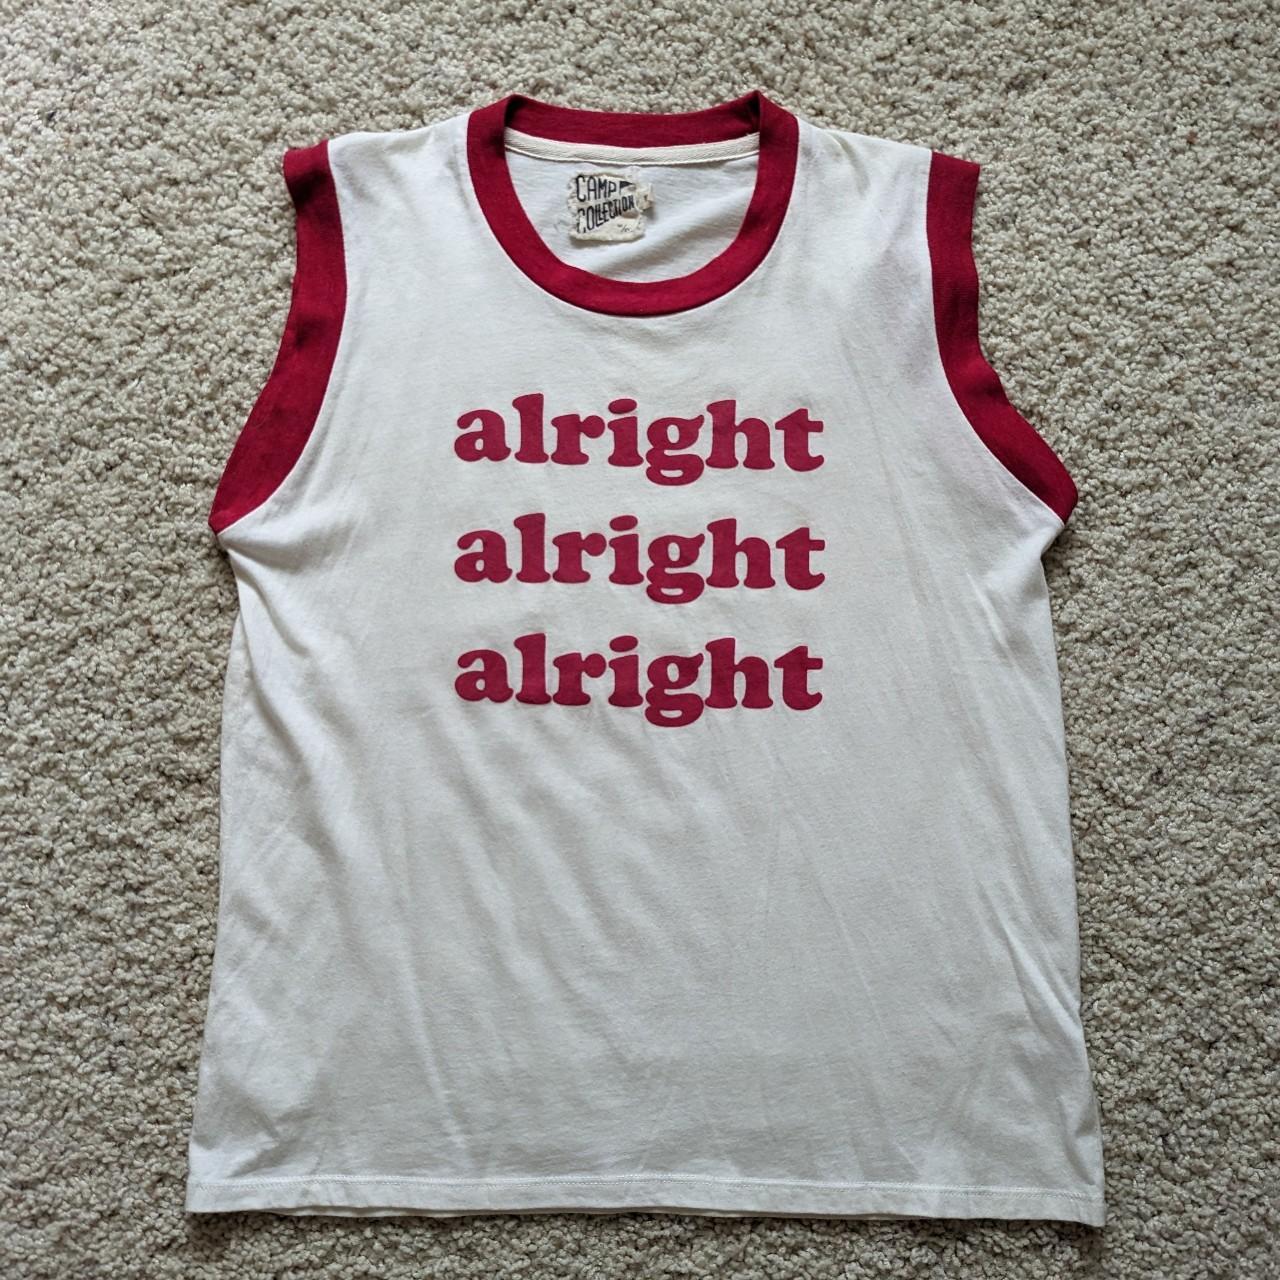 Camp Collection Women's White and Red Vest